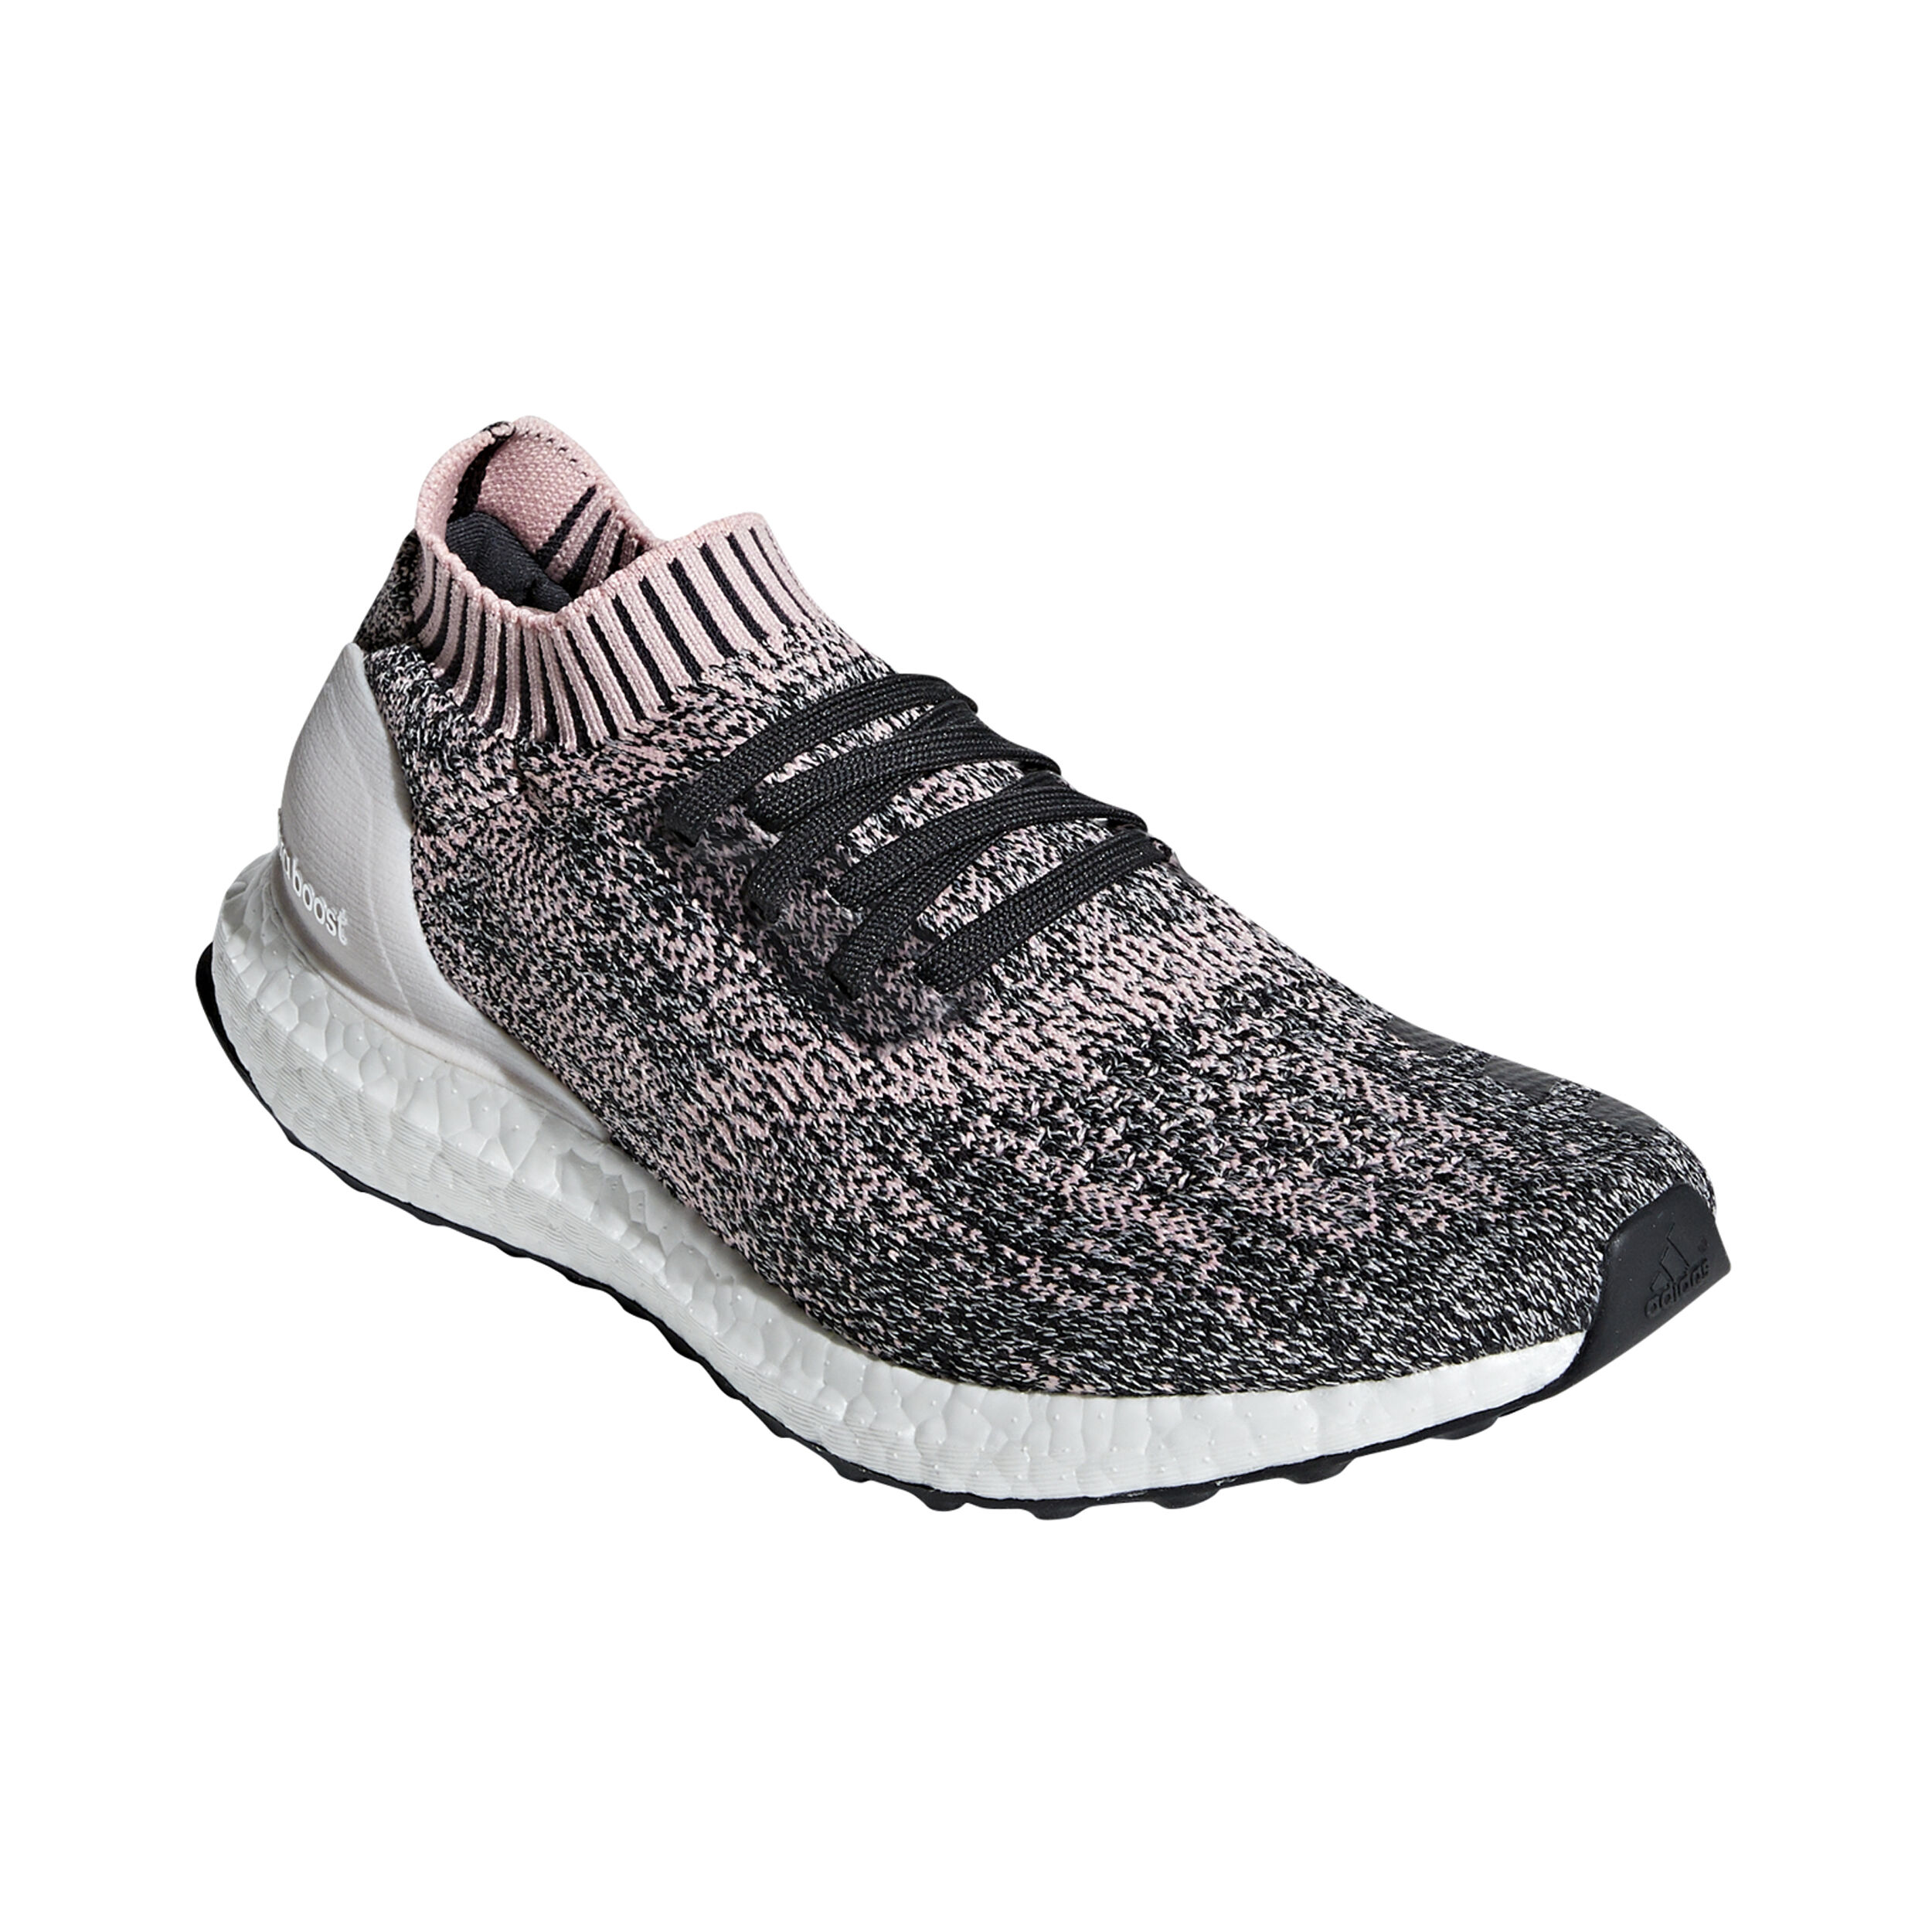 adidas ultra boost uncaged womens pink